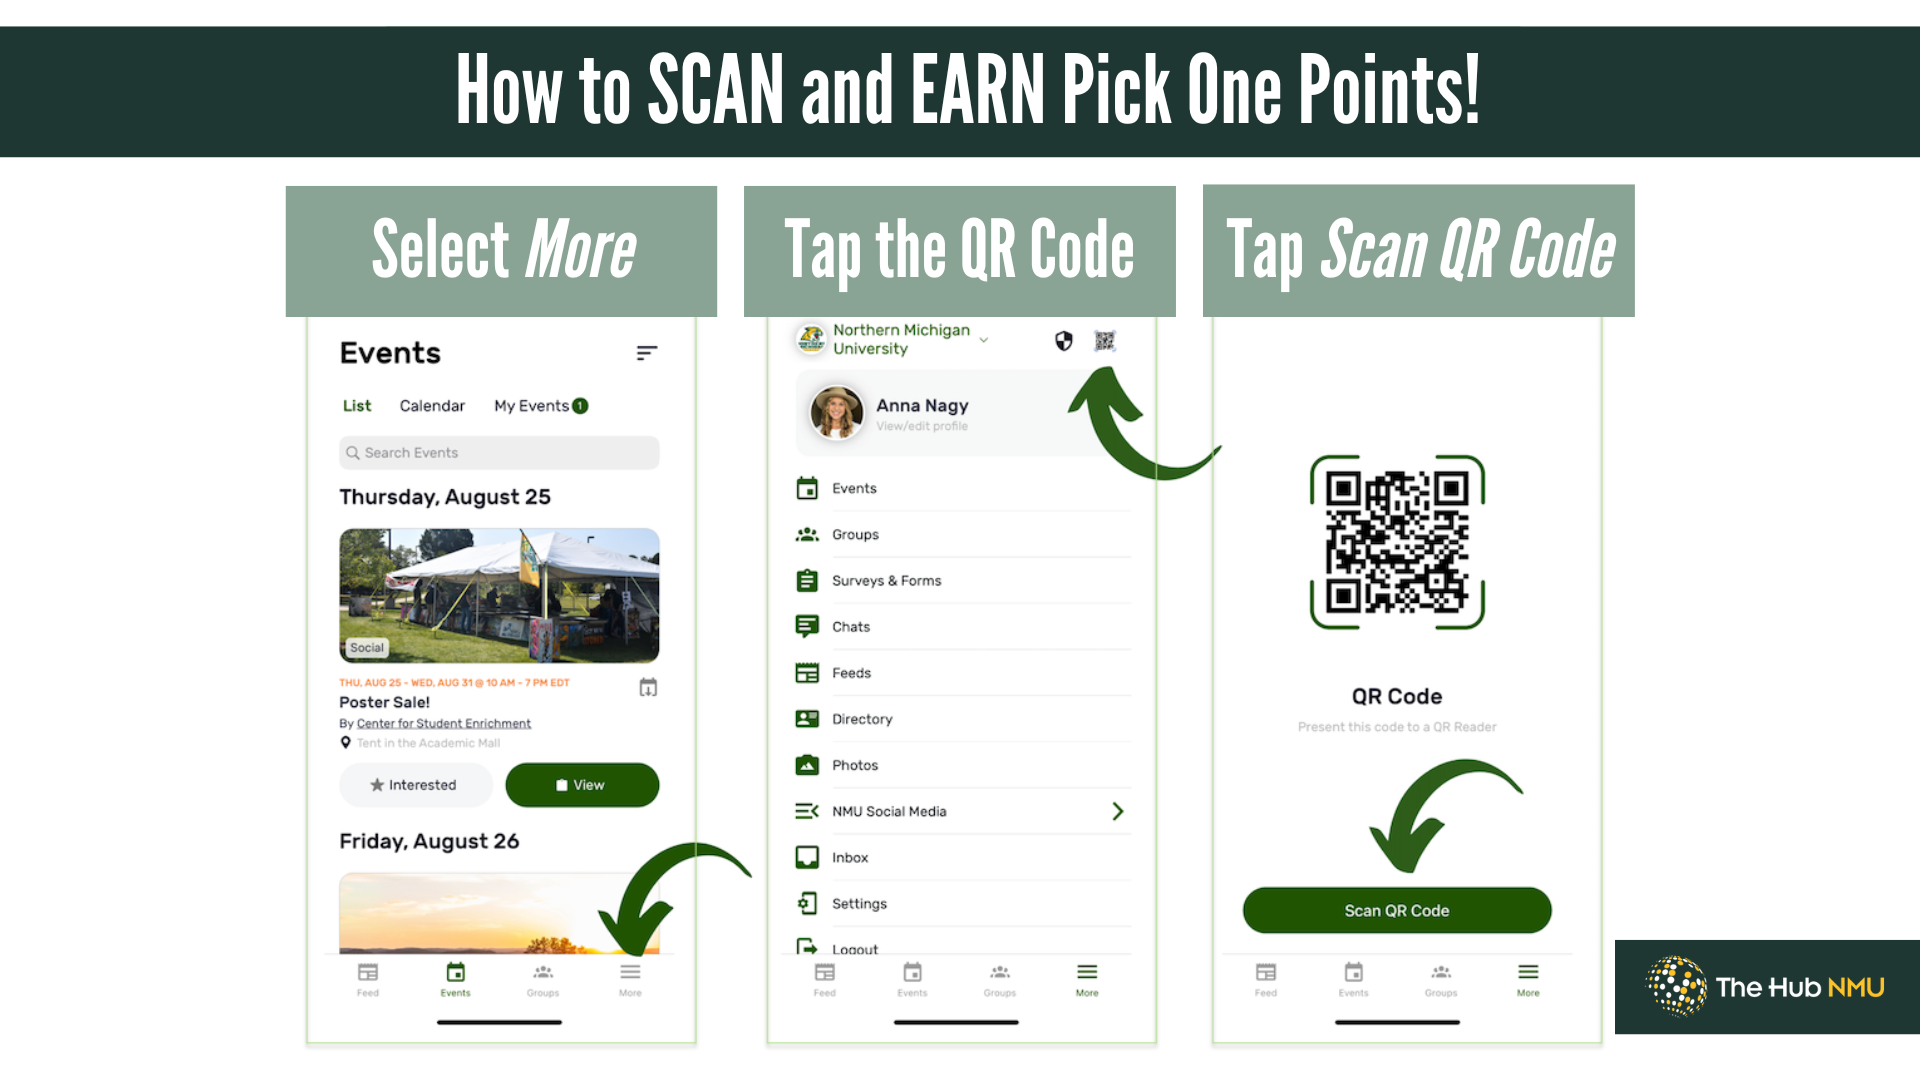 How to scan pick one points